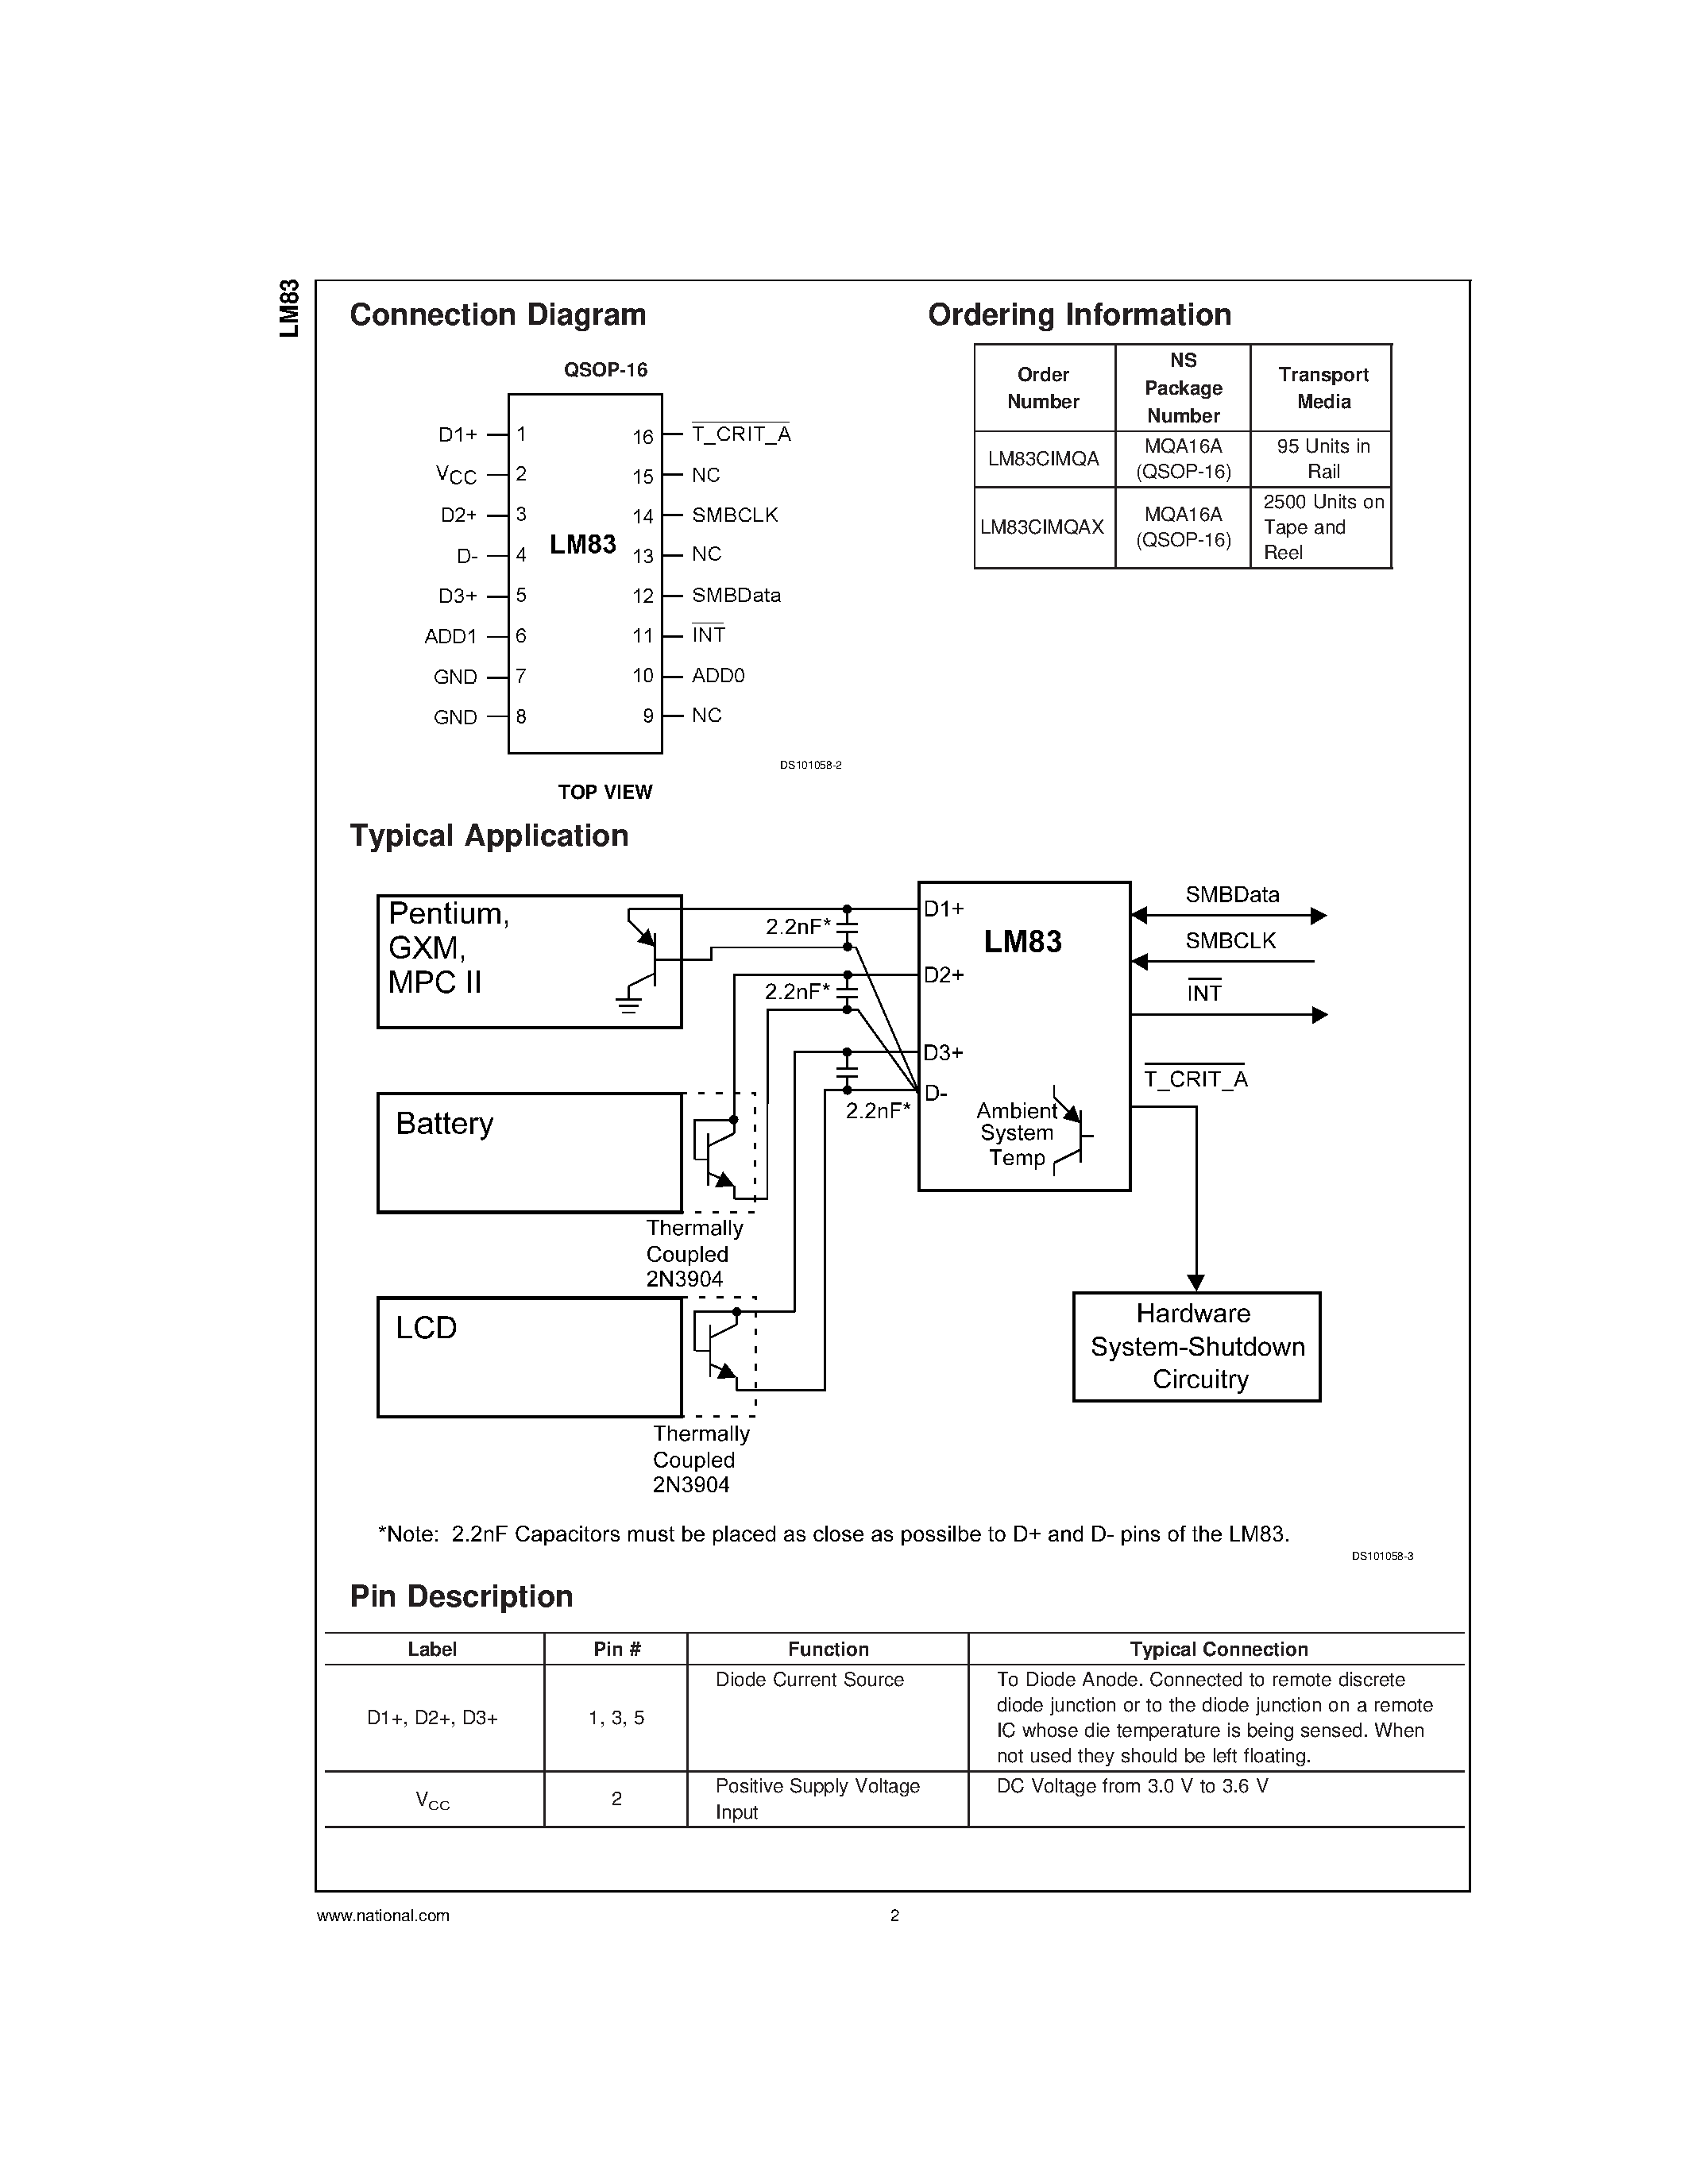 Datasheet LM83CIMQAX - Triple-Diode Input and Local Digital Temperature Sensor with Two-Wire Interface page 2